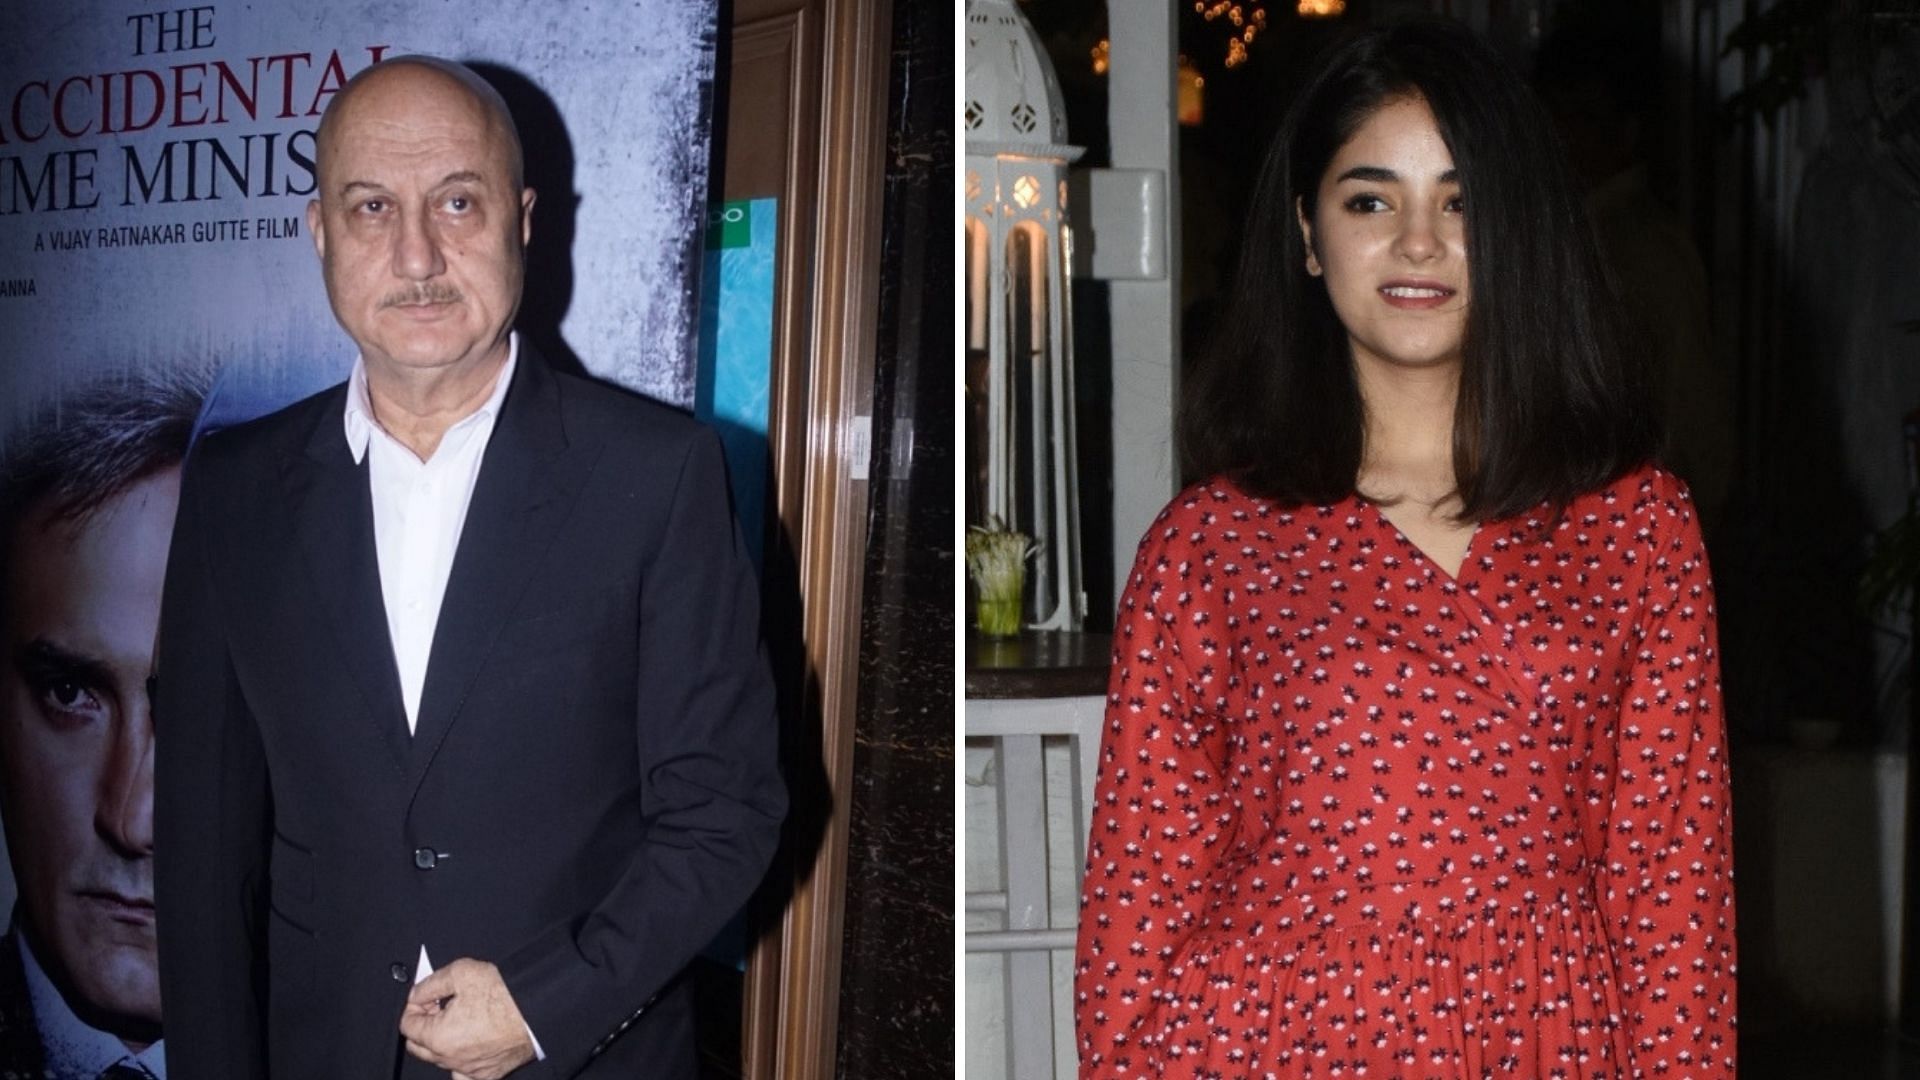 Anupam Kher has spoken out about Zaira Wasim’s decision to quit Bollywood.